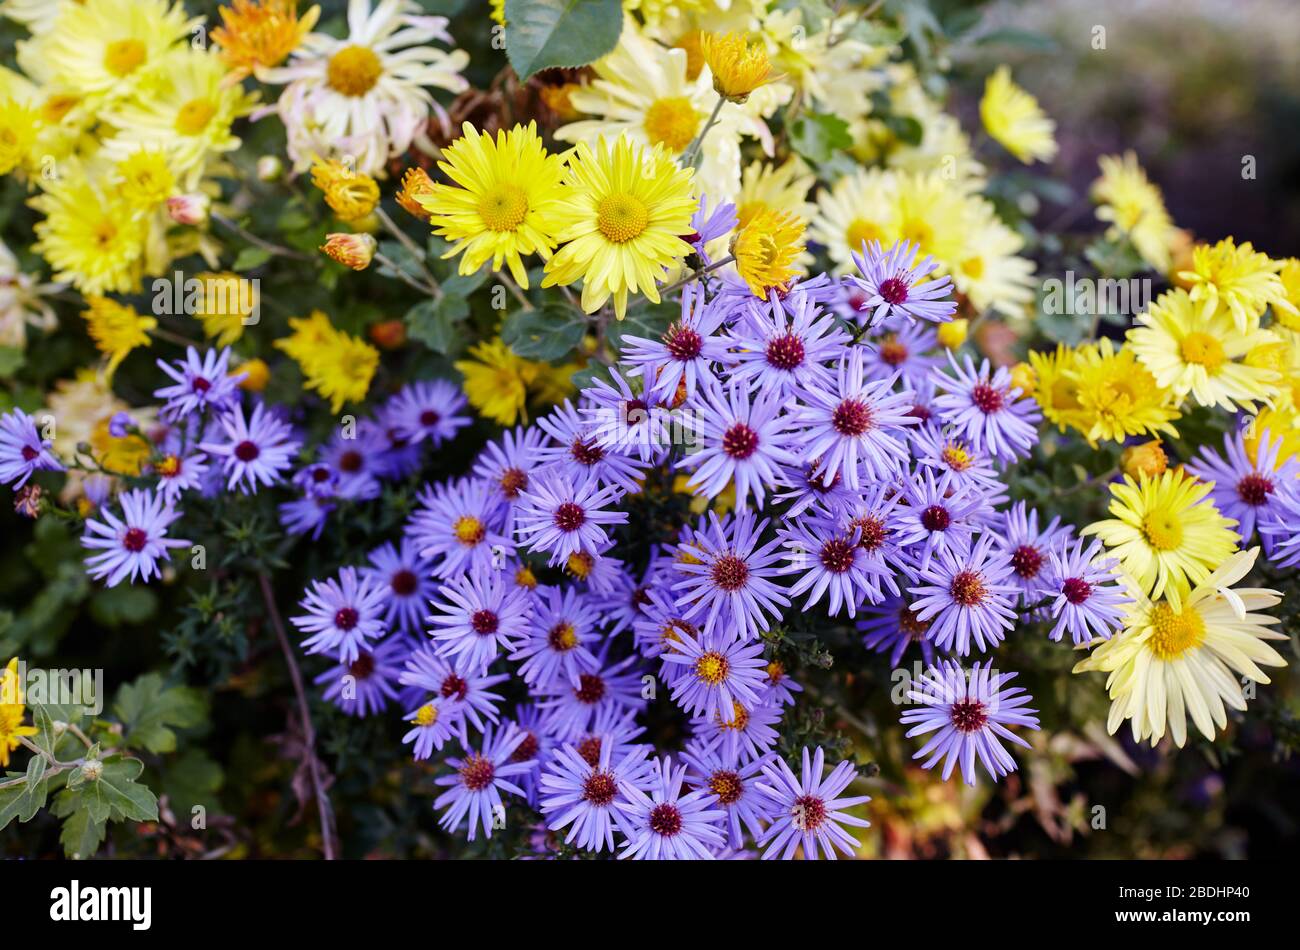 Floral background and natural pattern with violet aromatic aster (symphyotrichum oblongifolium) and yellow chrysanthemum flowers blooming in the park Stock Photo